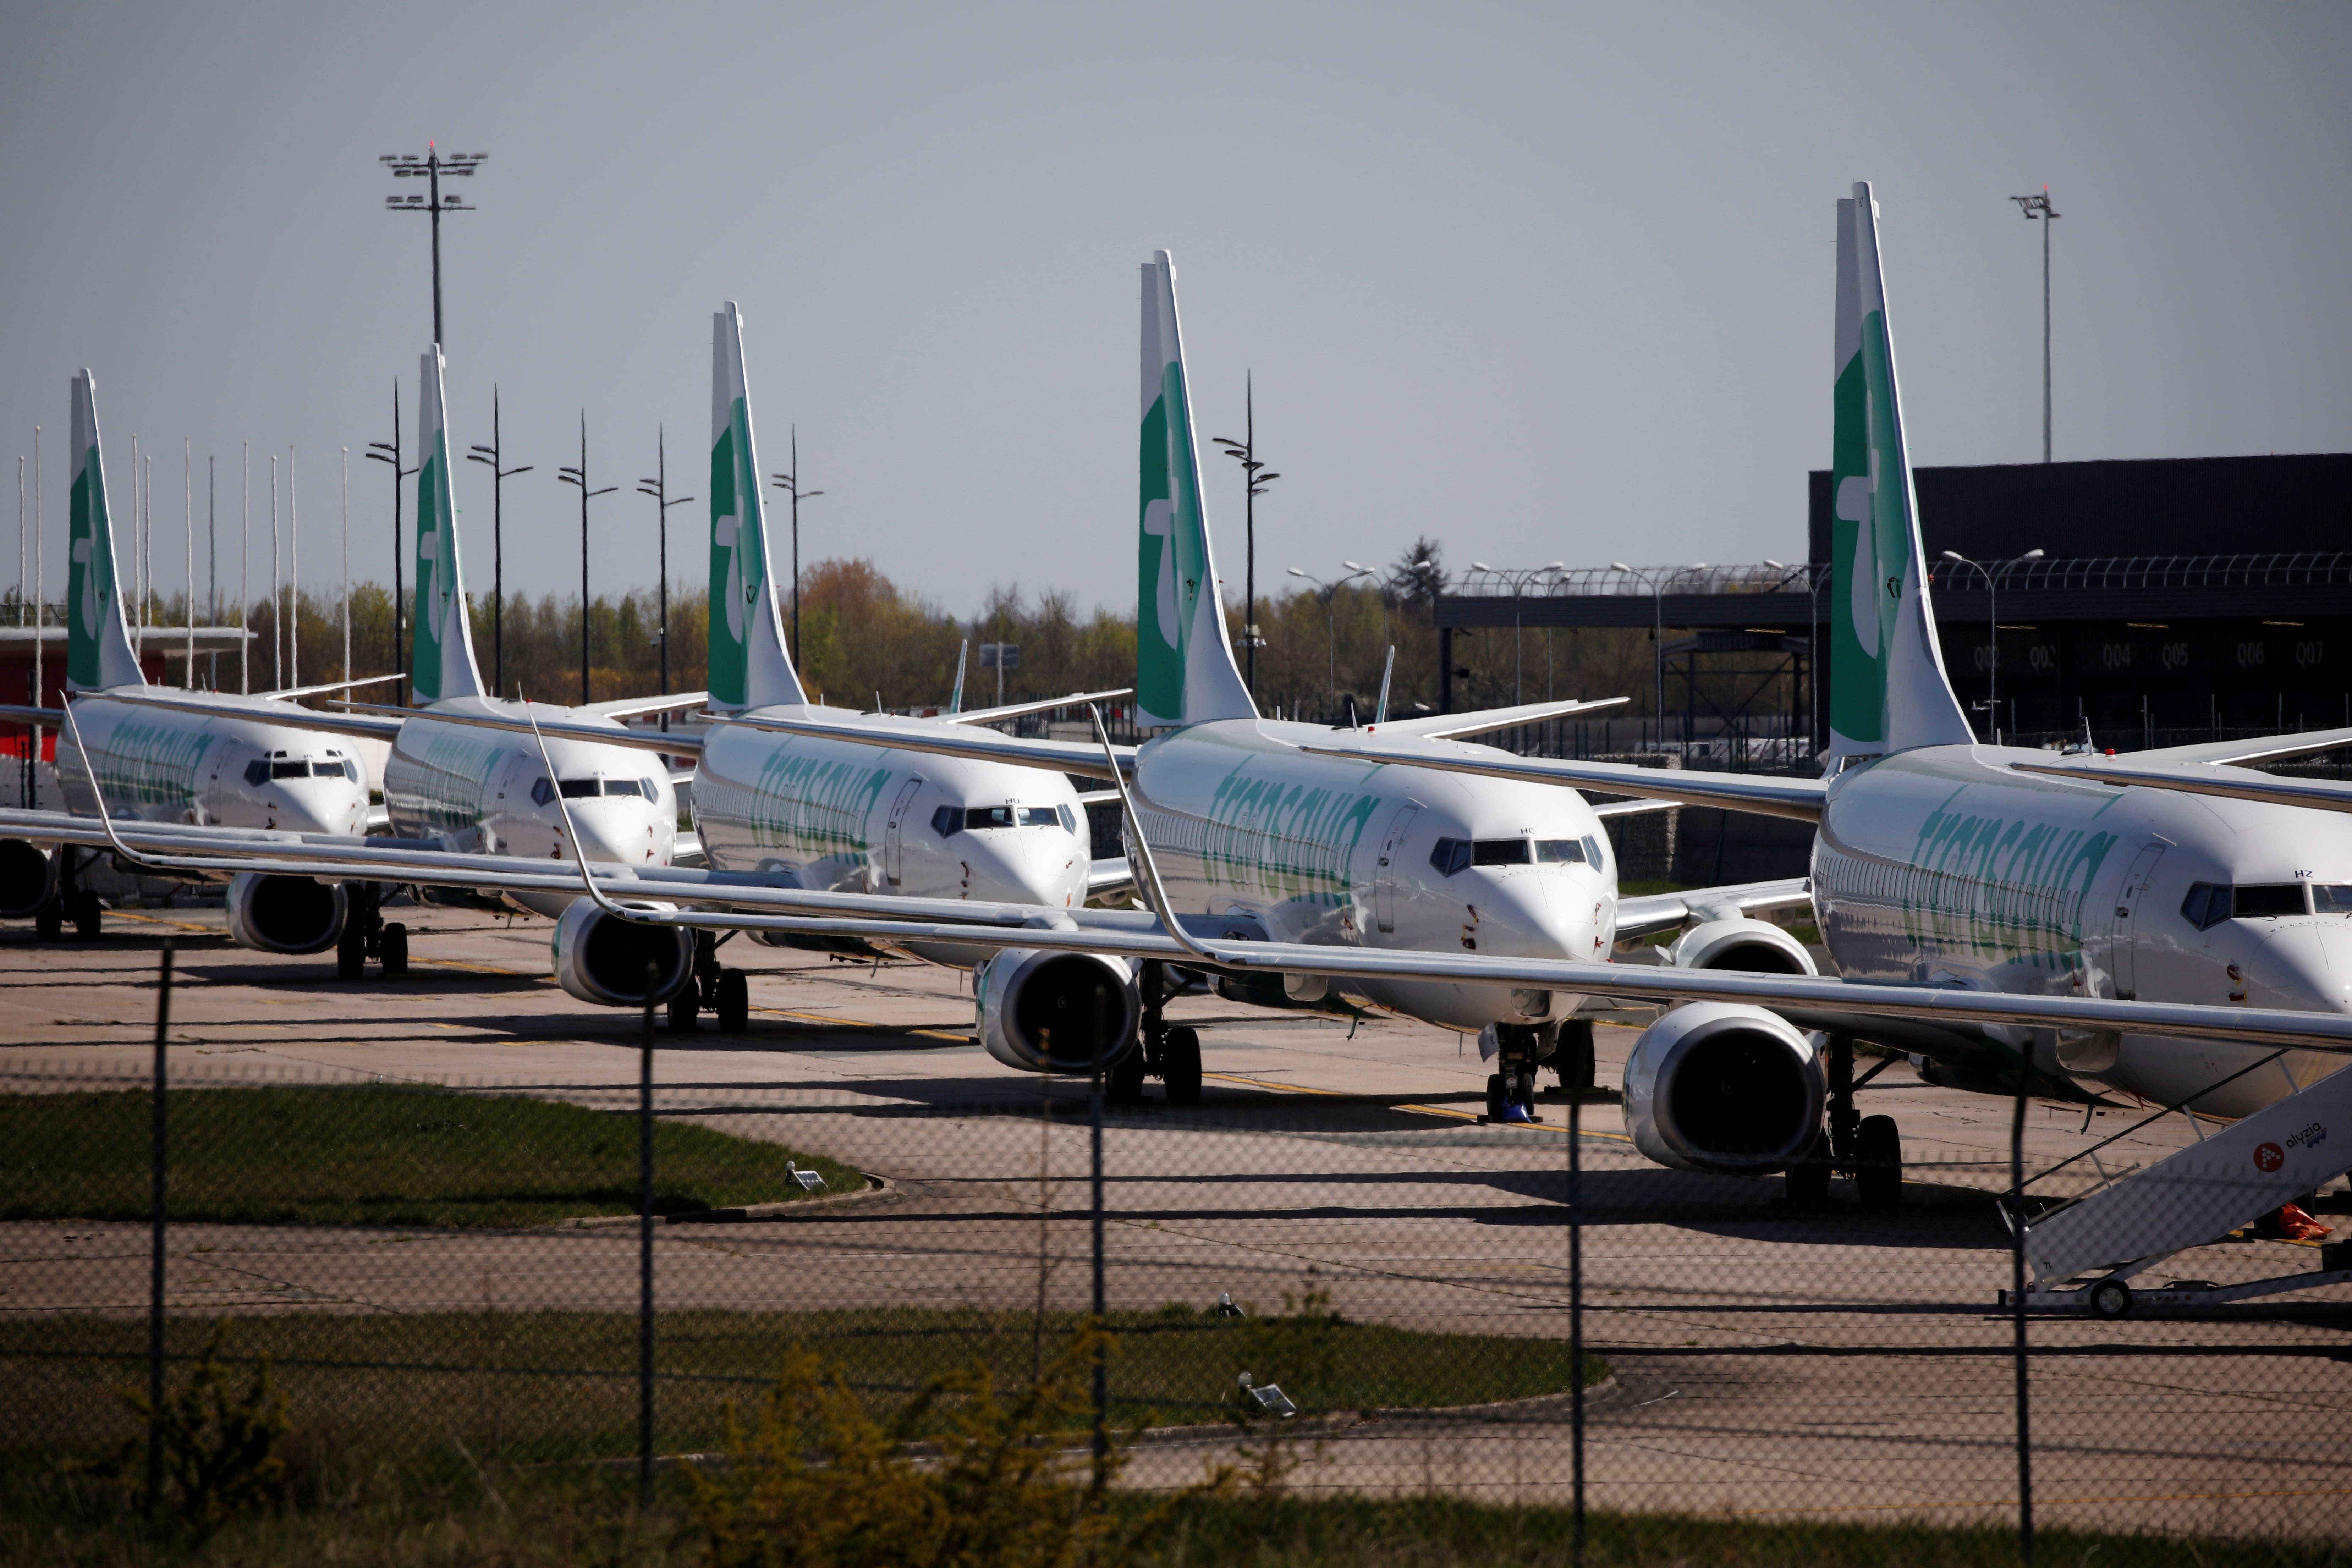 Transavia Boeing 737 aircrafts are parked on the tarmac at Orly Airport following the coronavirus disease (COVID-19) outbreak in France April 4, 2020. (Credit: Reuters Photo)